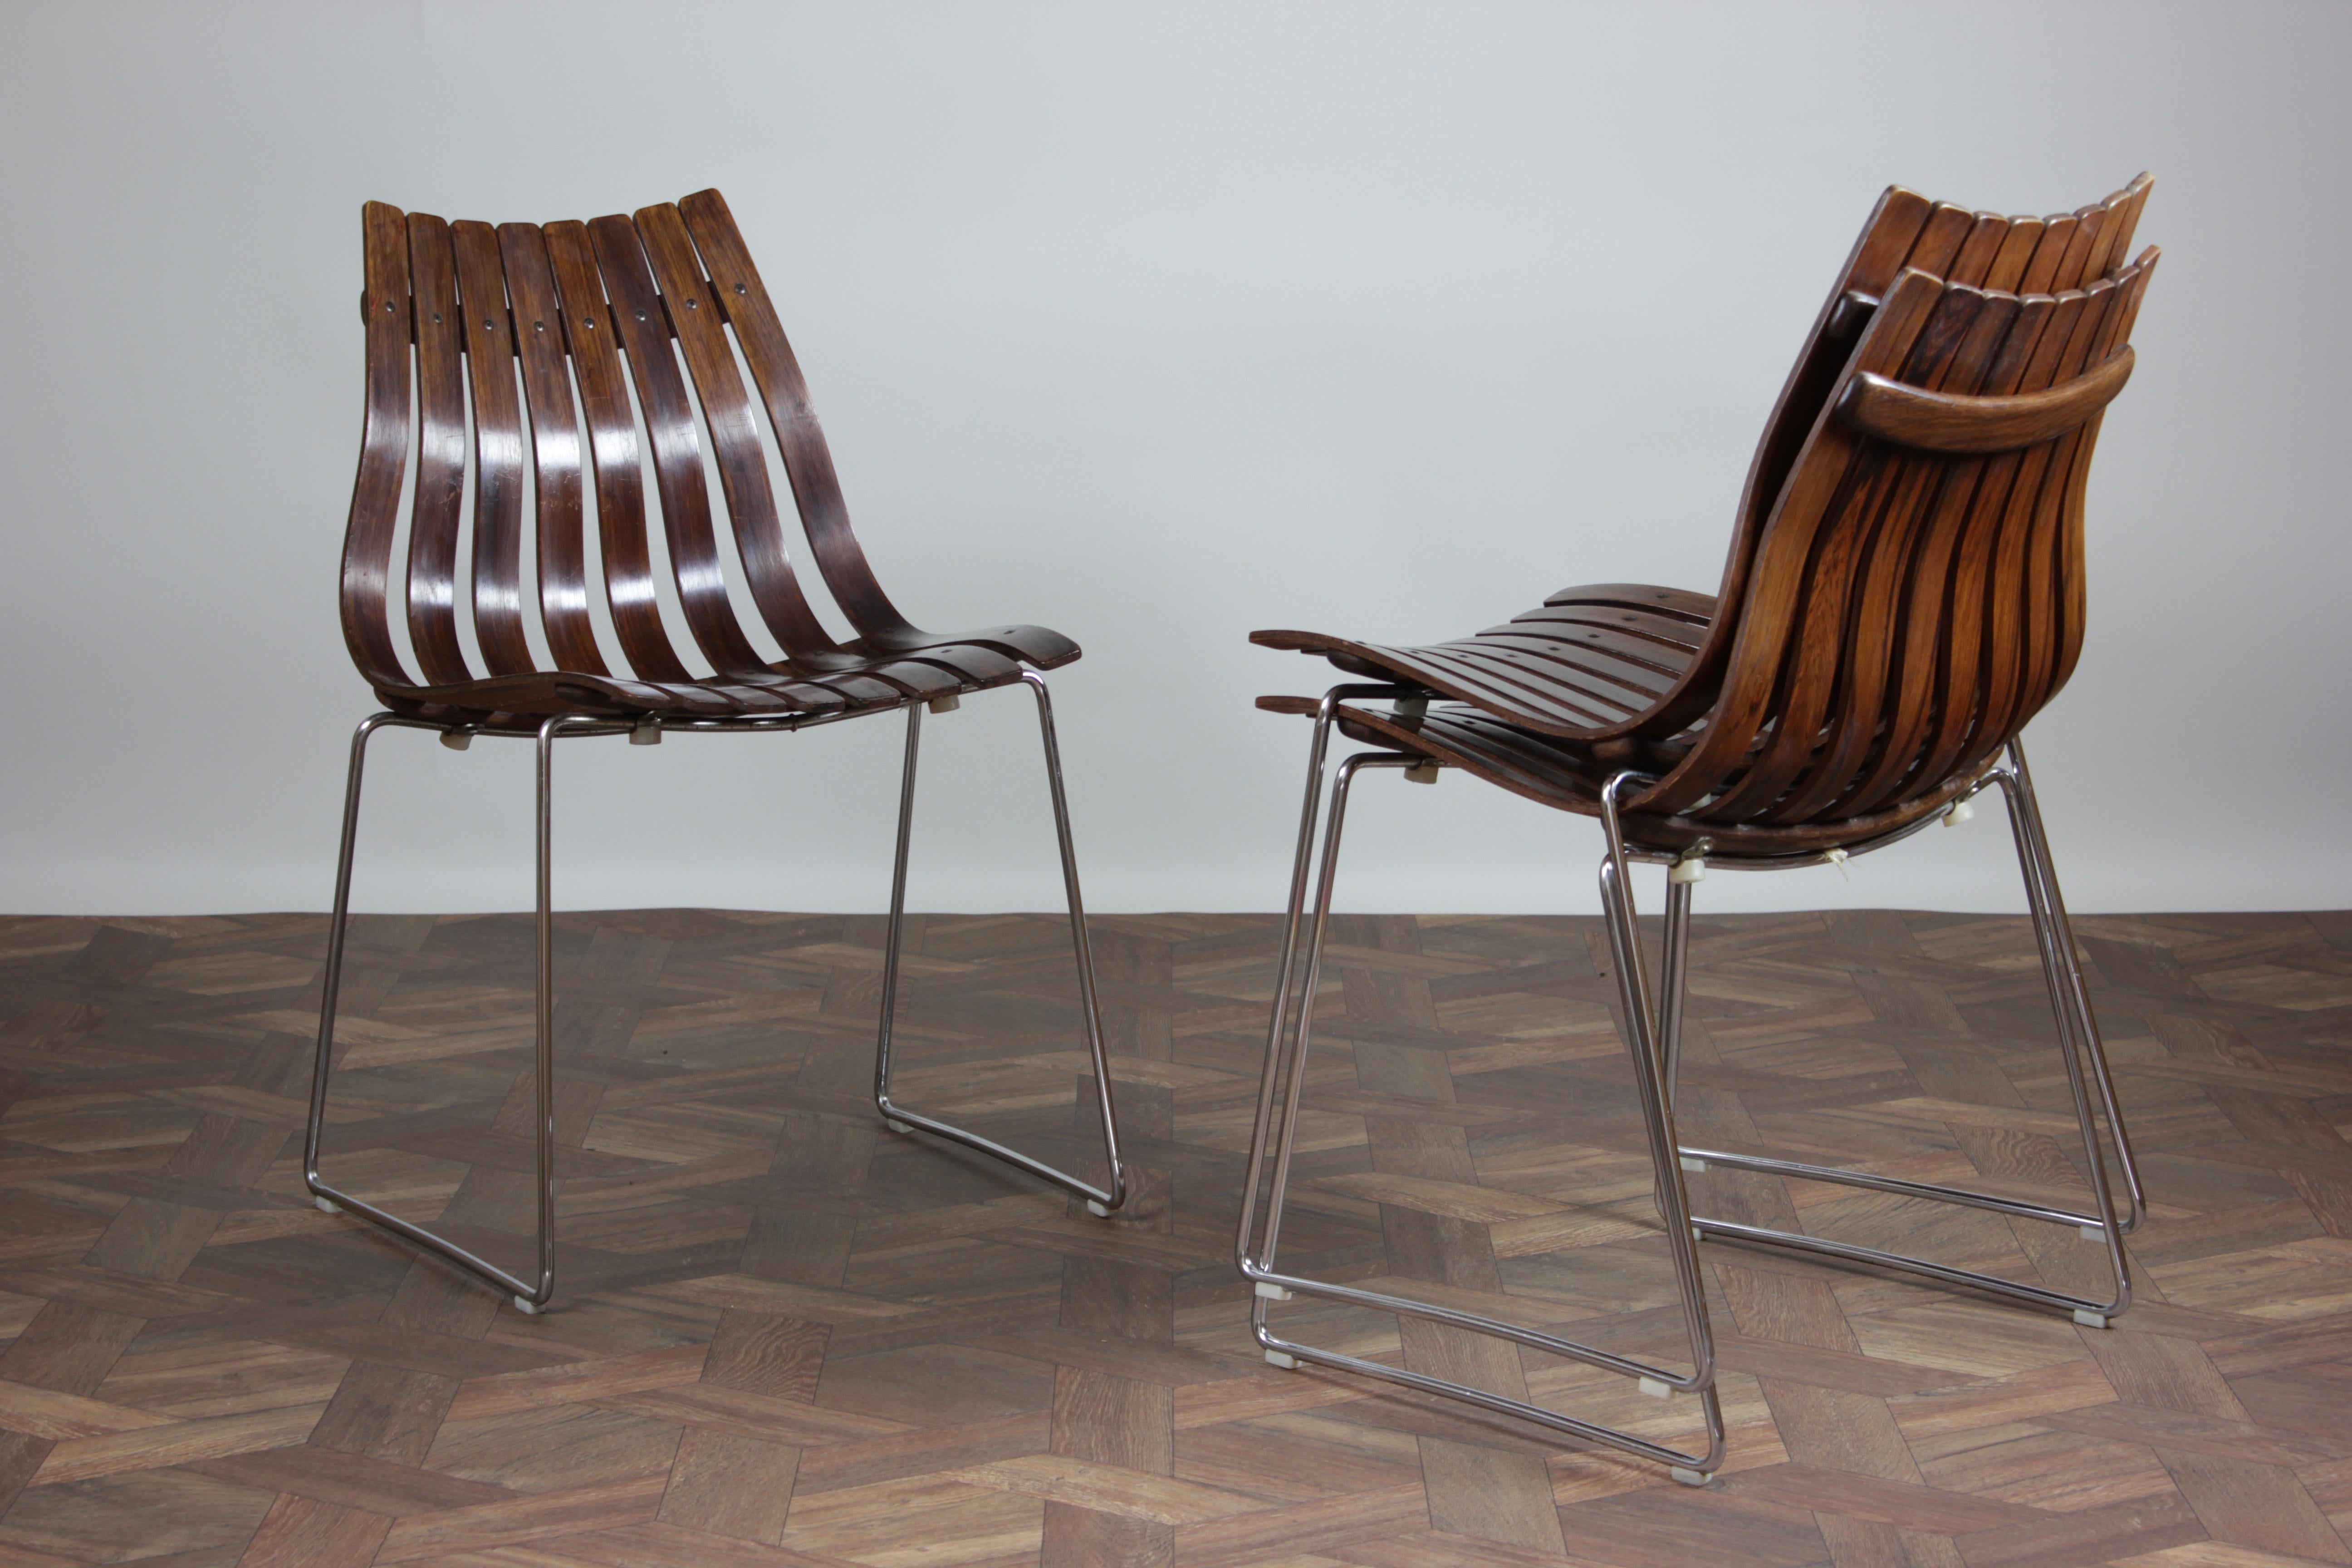 Norwegian Set of Six Mid Century Modern Dining Chairs by Hans Brattrud for Hove Møbler